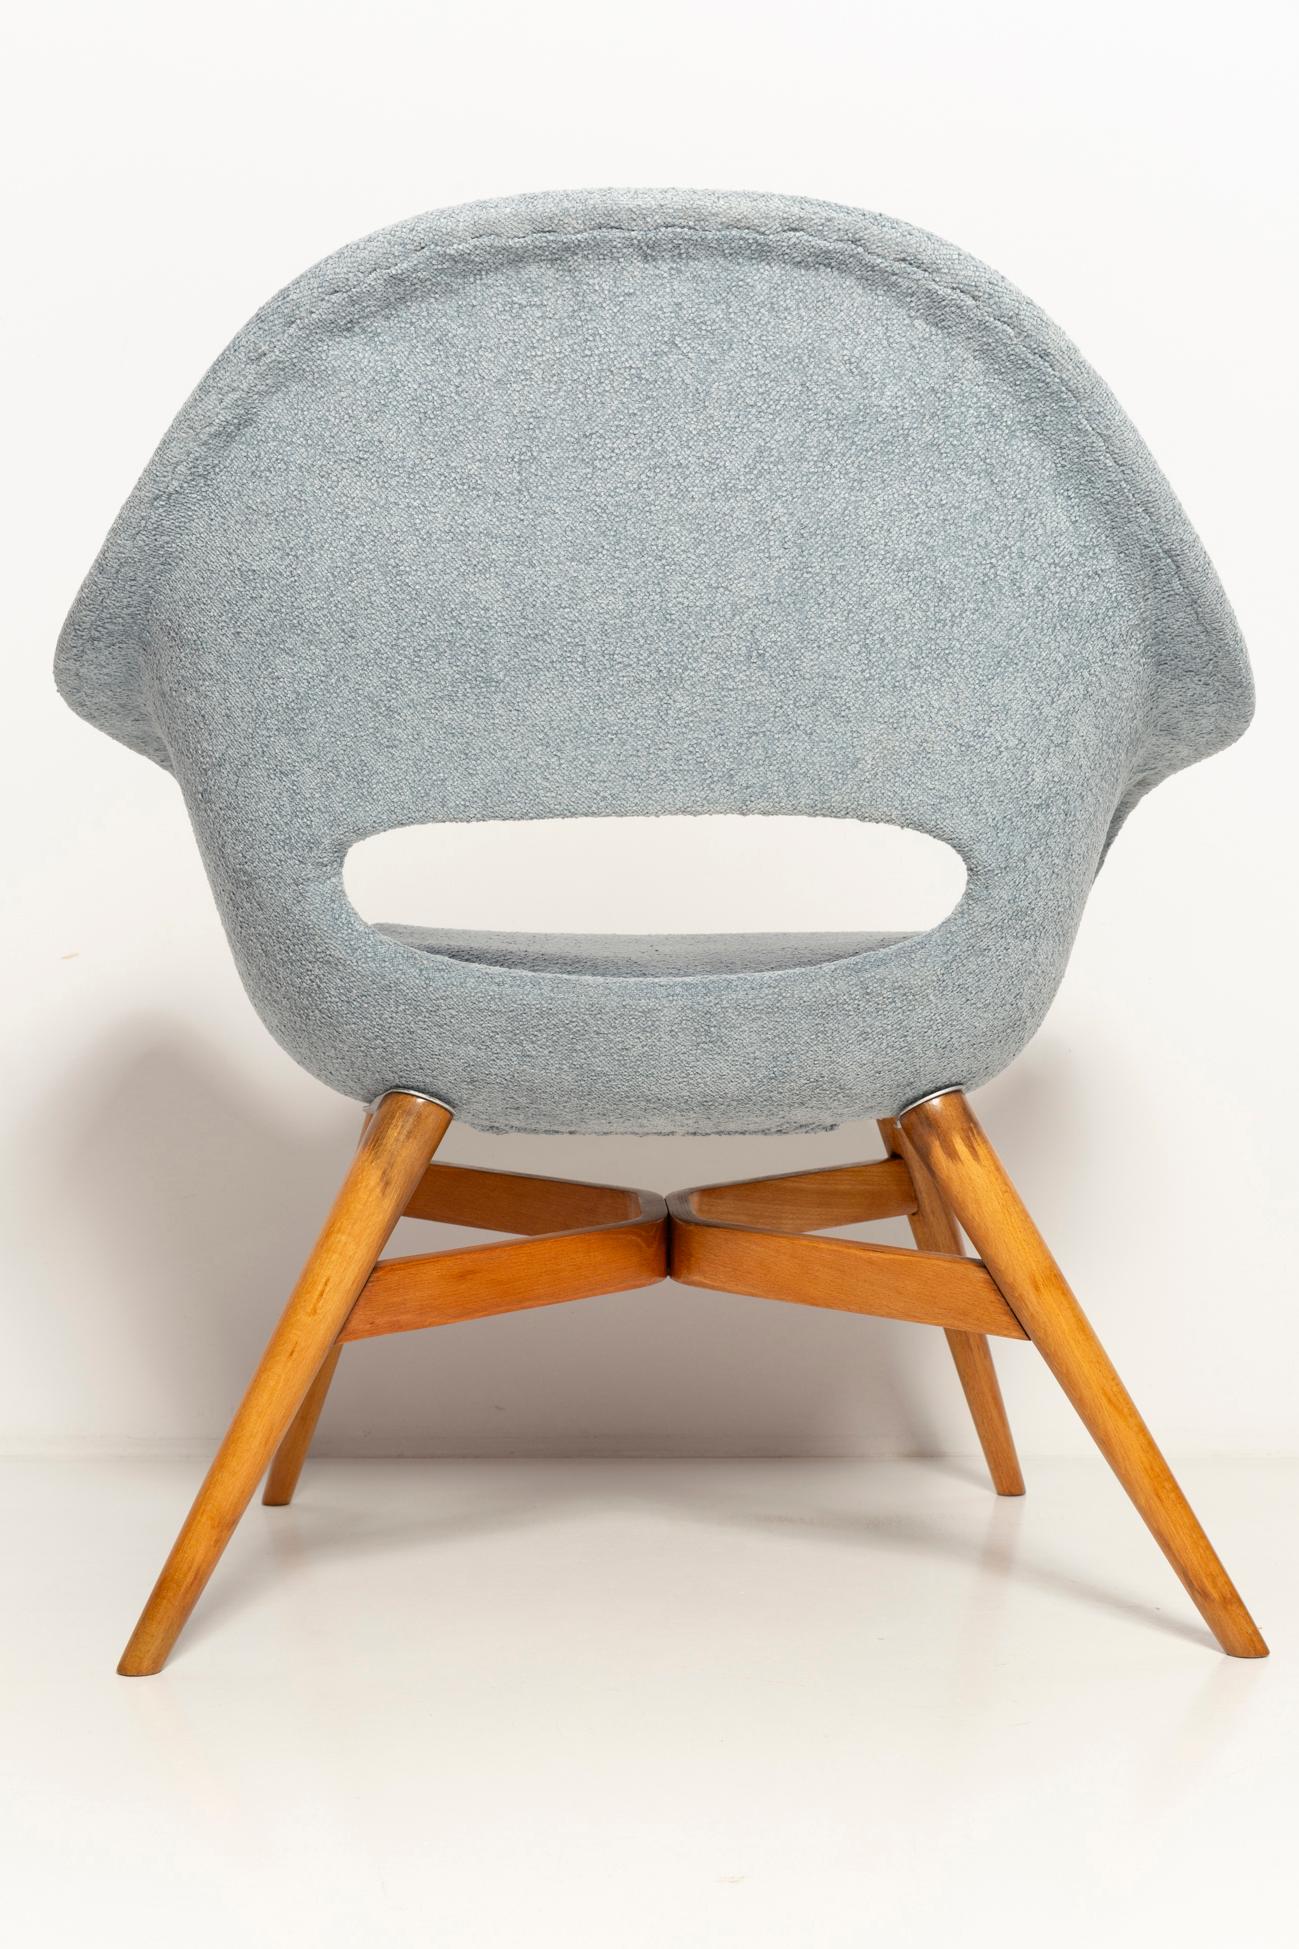 Set of Two Mid-Century Light Blue Shell Chairs, by Navratil, Czechoslovakia 1960 For Sale 5